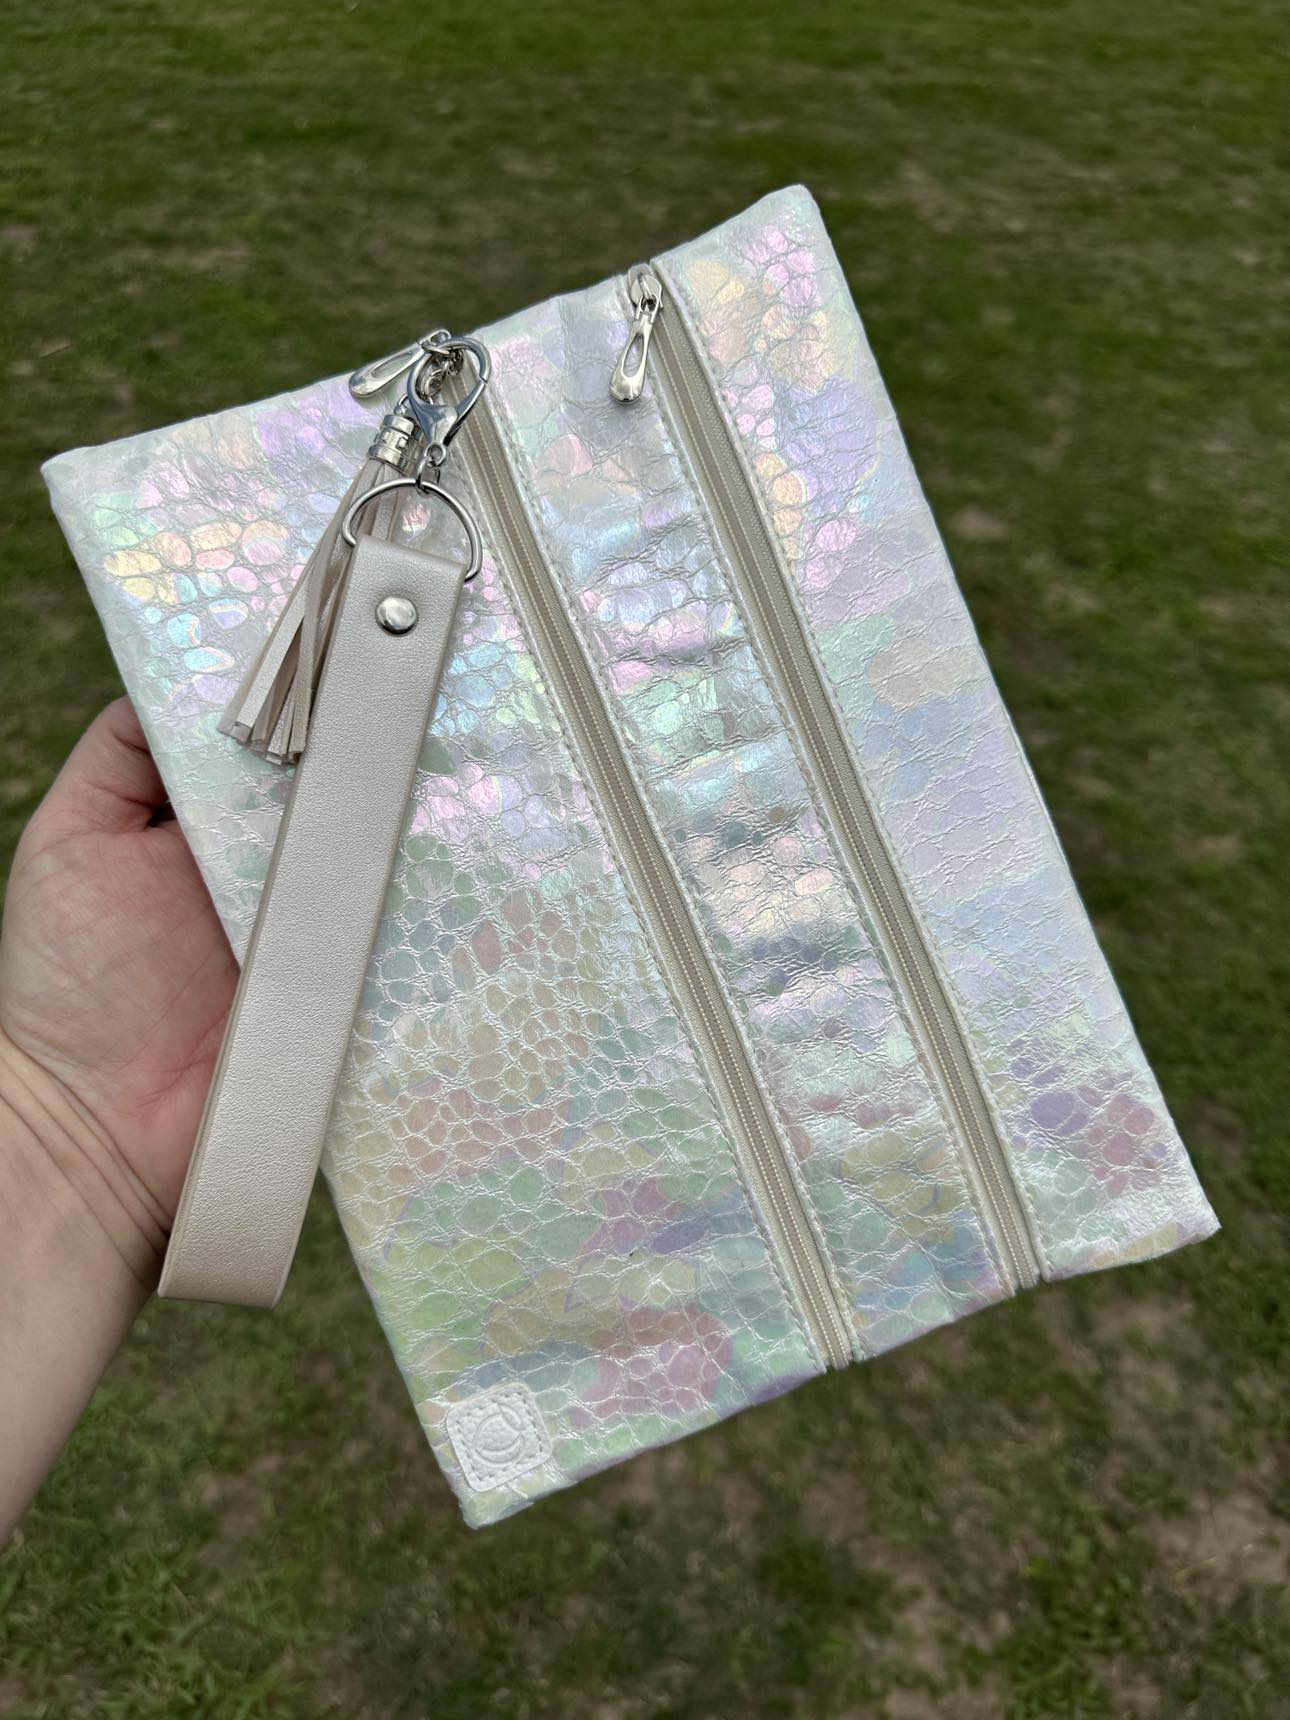 clutch_bag fashion_bag holographic_versi bag trendy_fashion_bag cute_clutch_bag fashion_and_function gift_ideas_for_her style_ootd